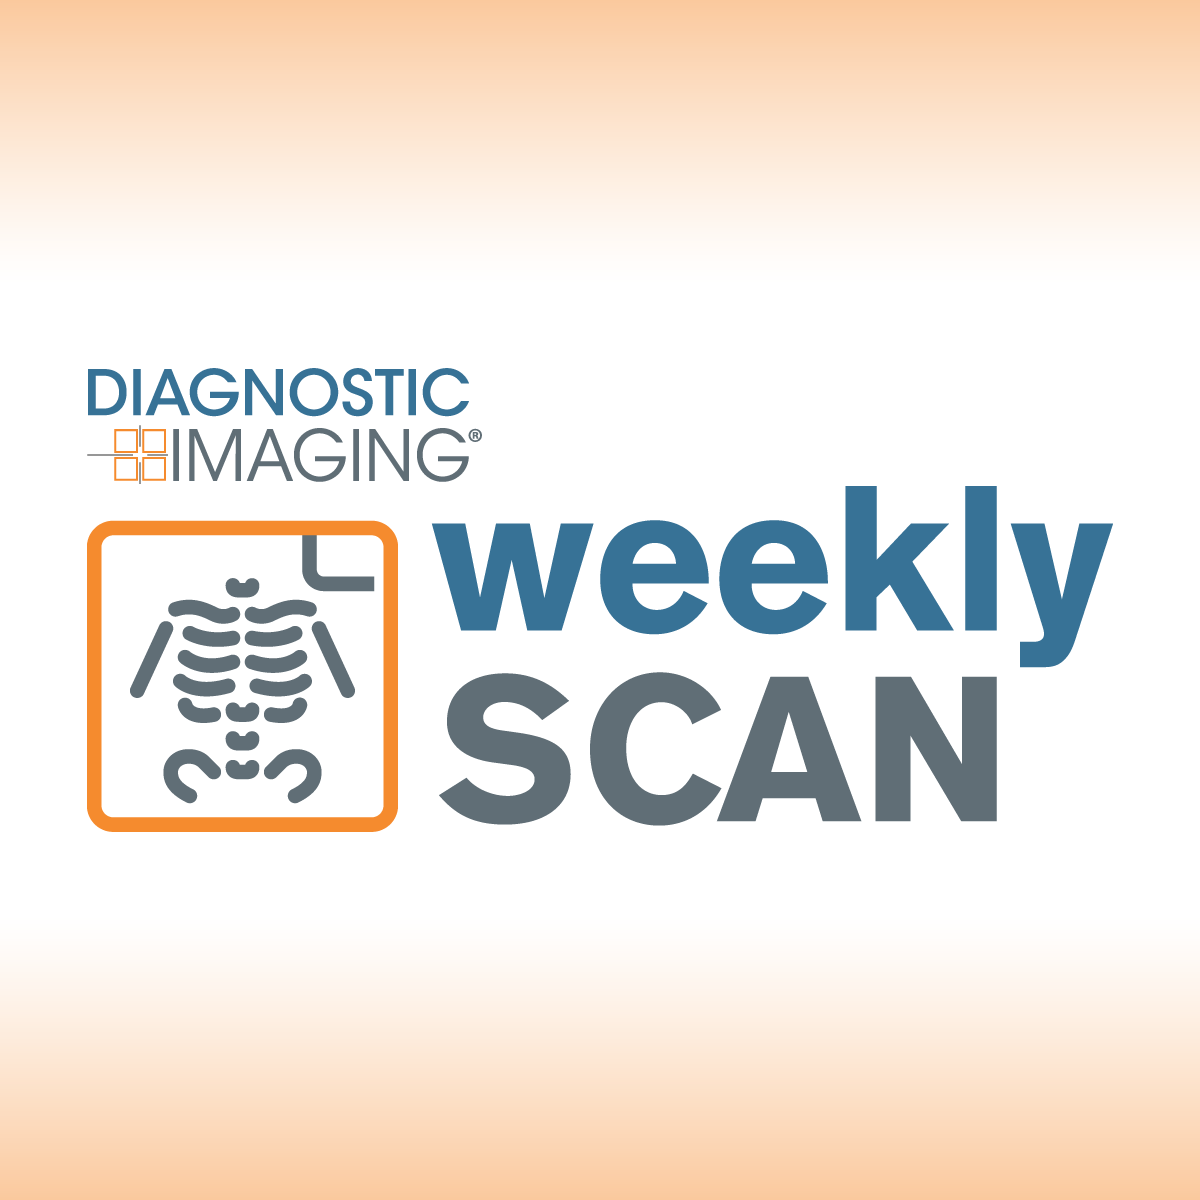 Diagnostic Imaging's Weekly Scan: March 24-March 30